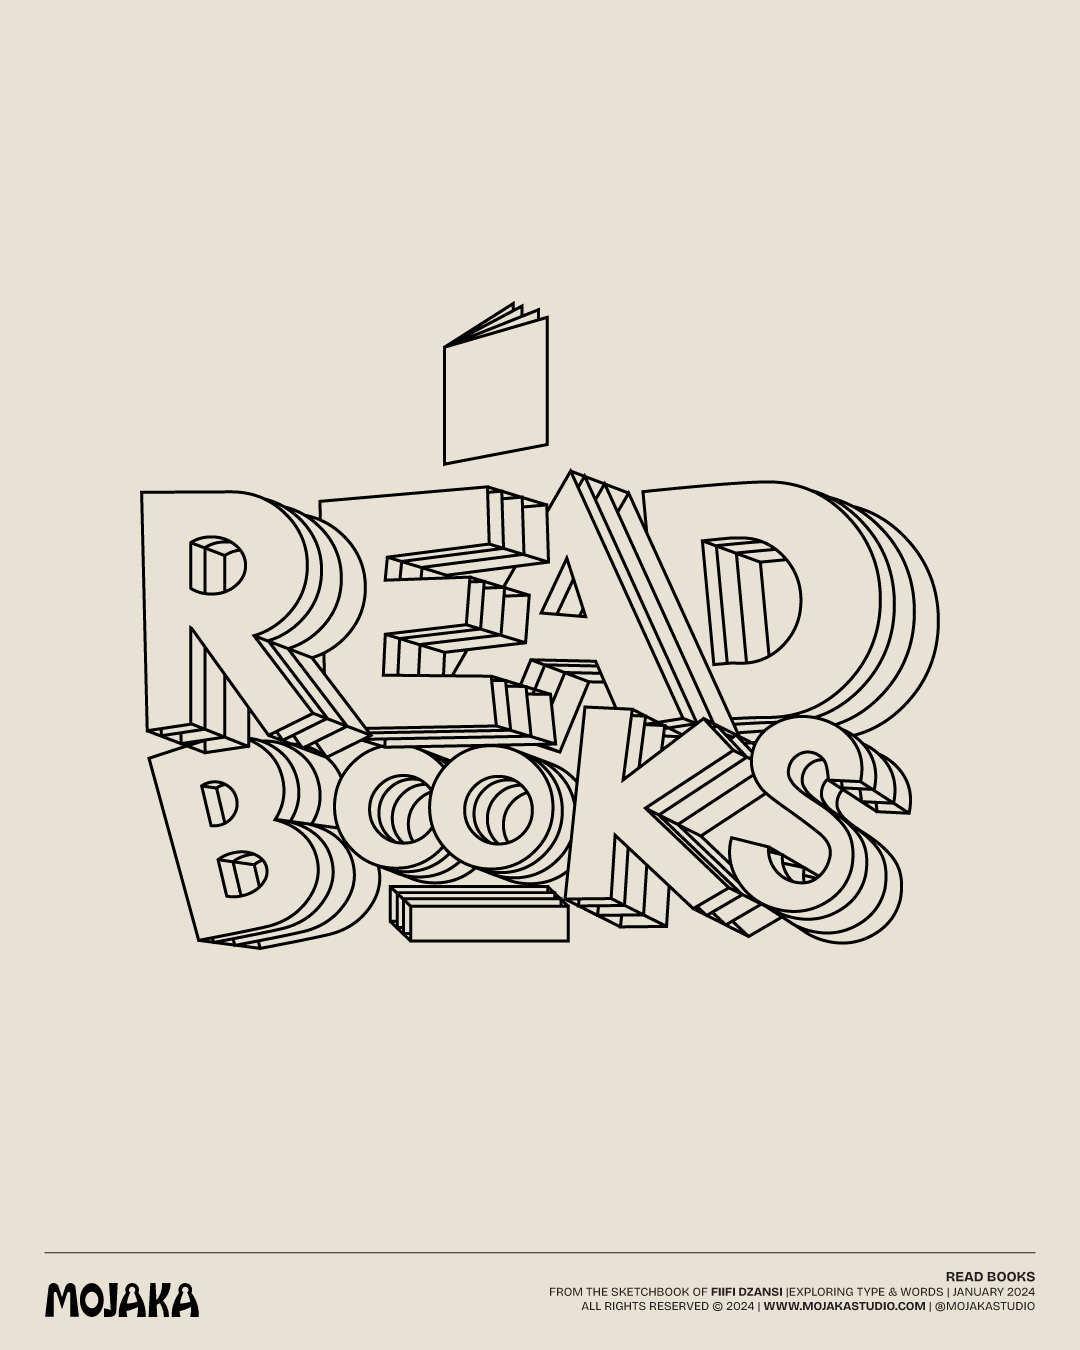 Read books type design outlines